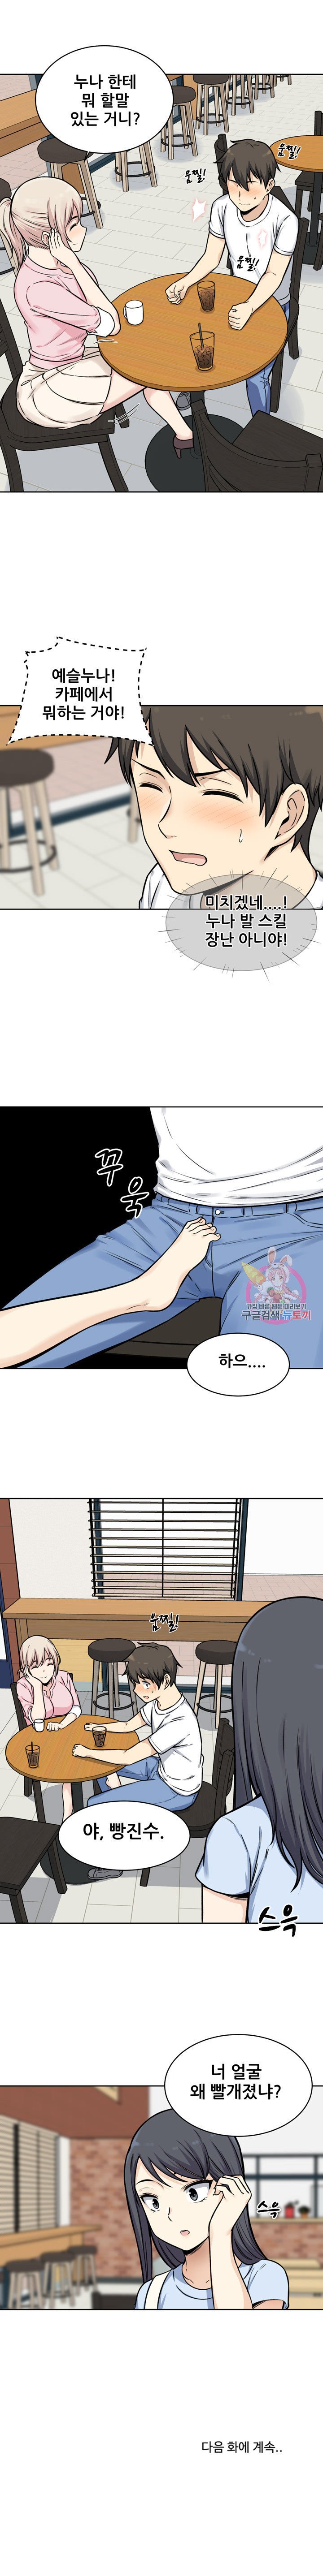 the-ark-is-me-raw-chap-32-18